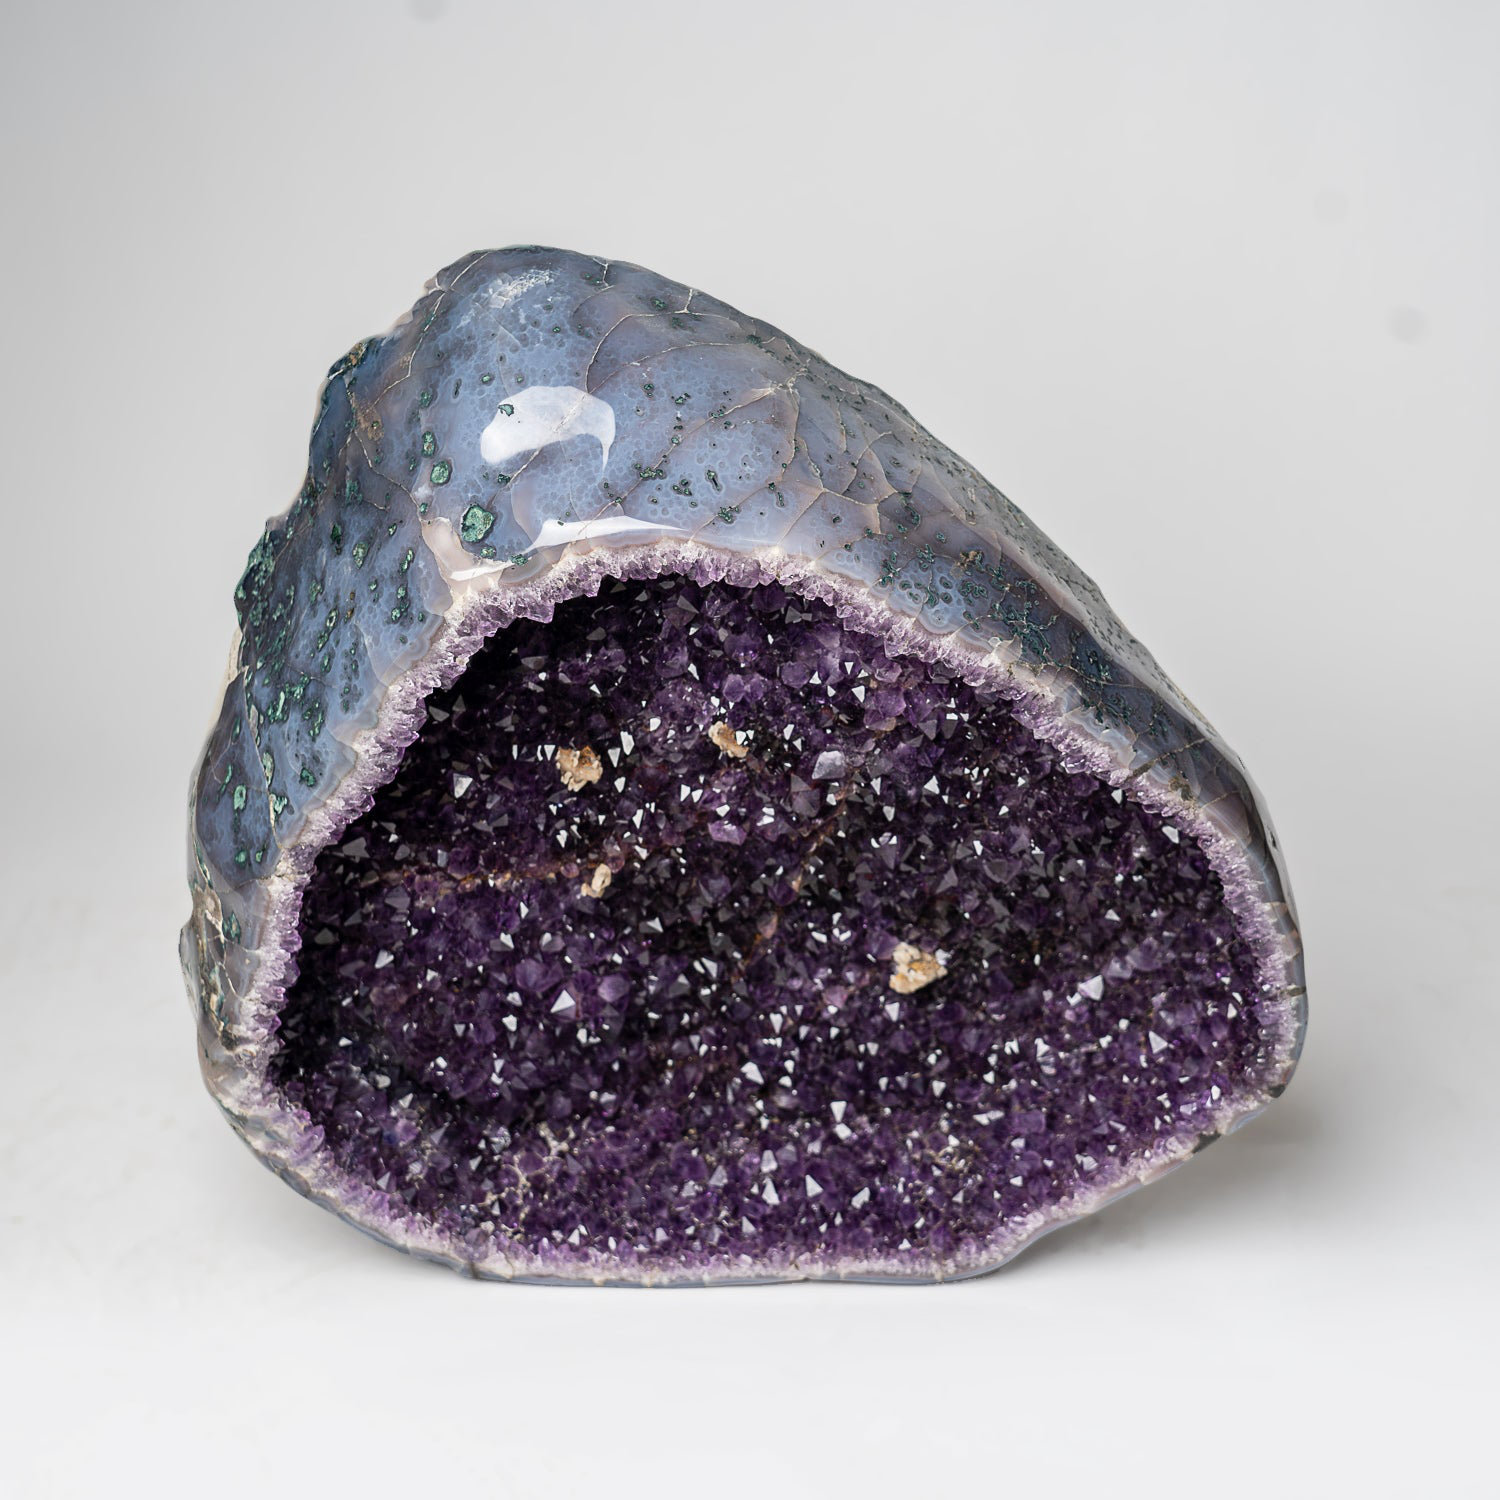 Gigantic Whole Geode for Kids, 1 Large Geode